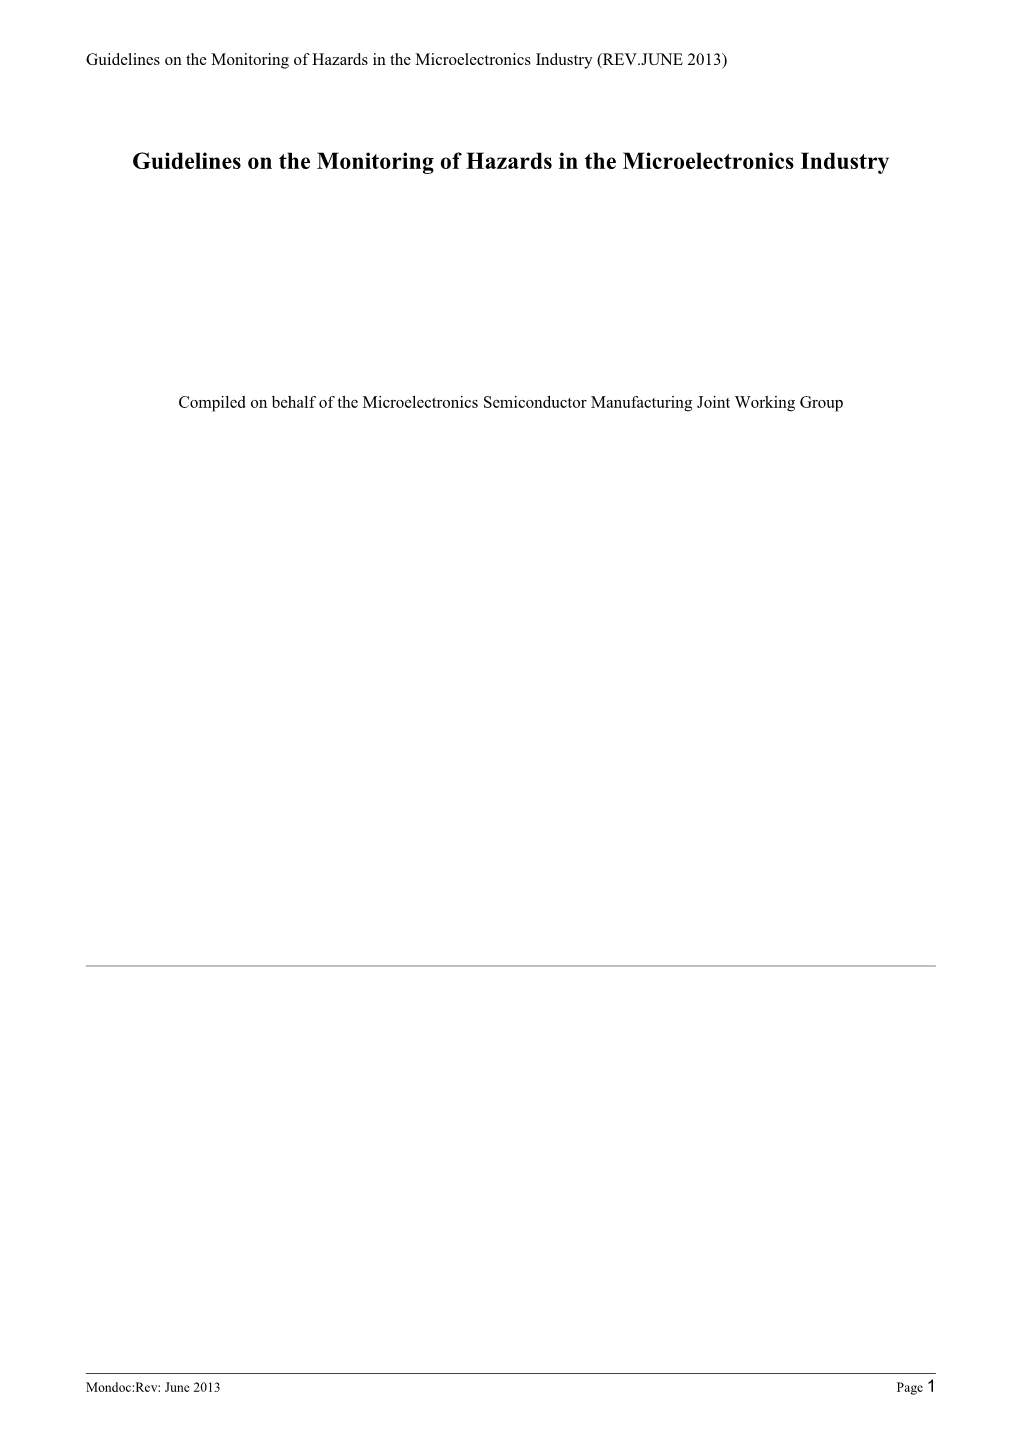 Guidelines on the Monitoring of Hazards in the Microelectronics Industry